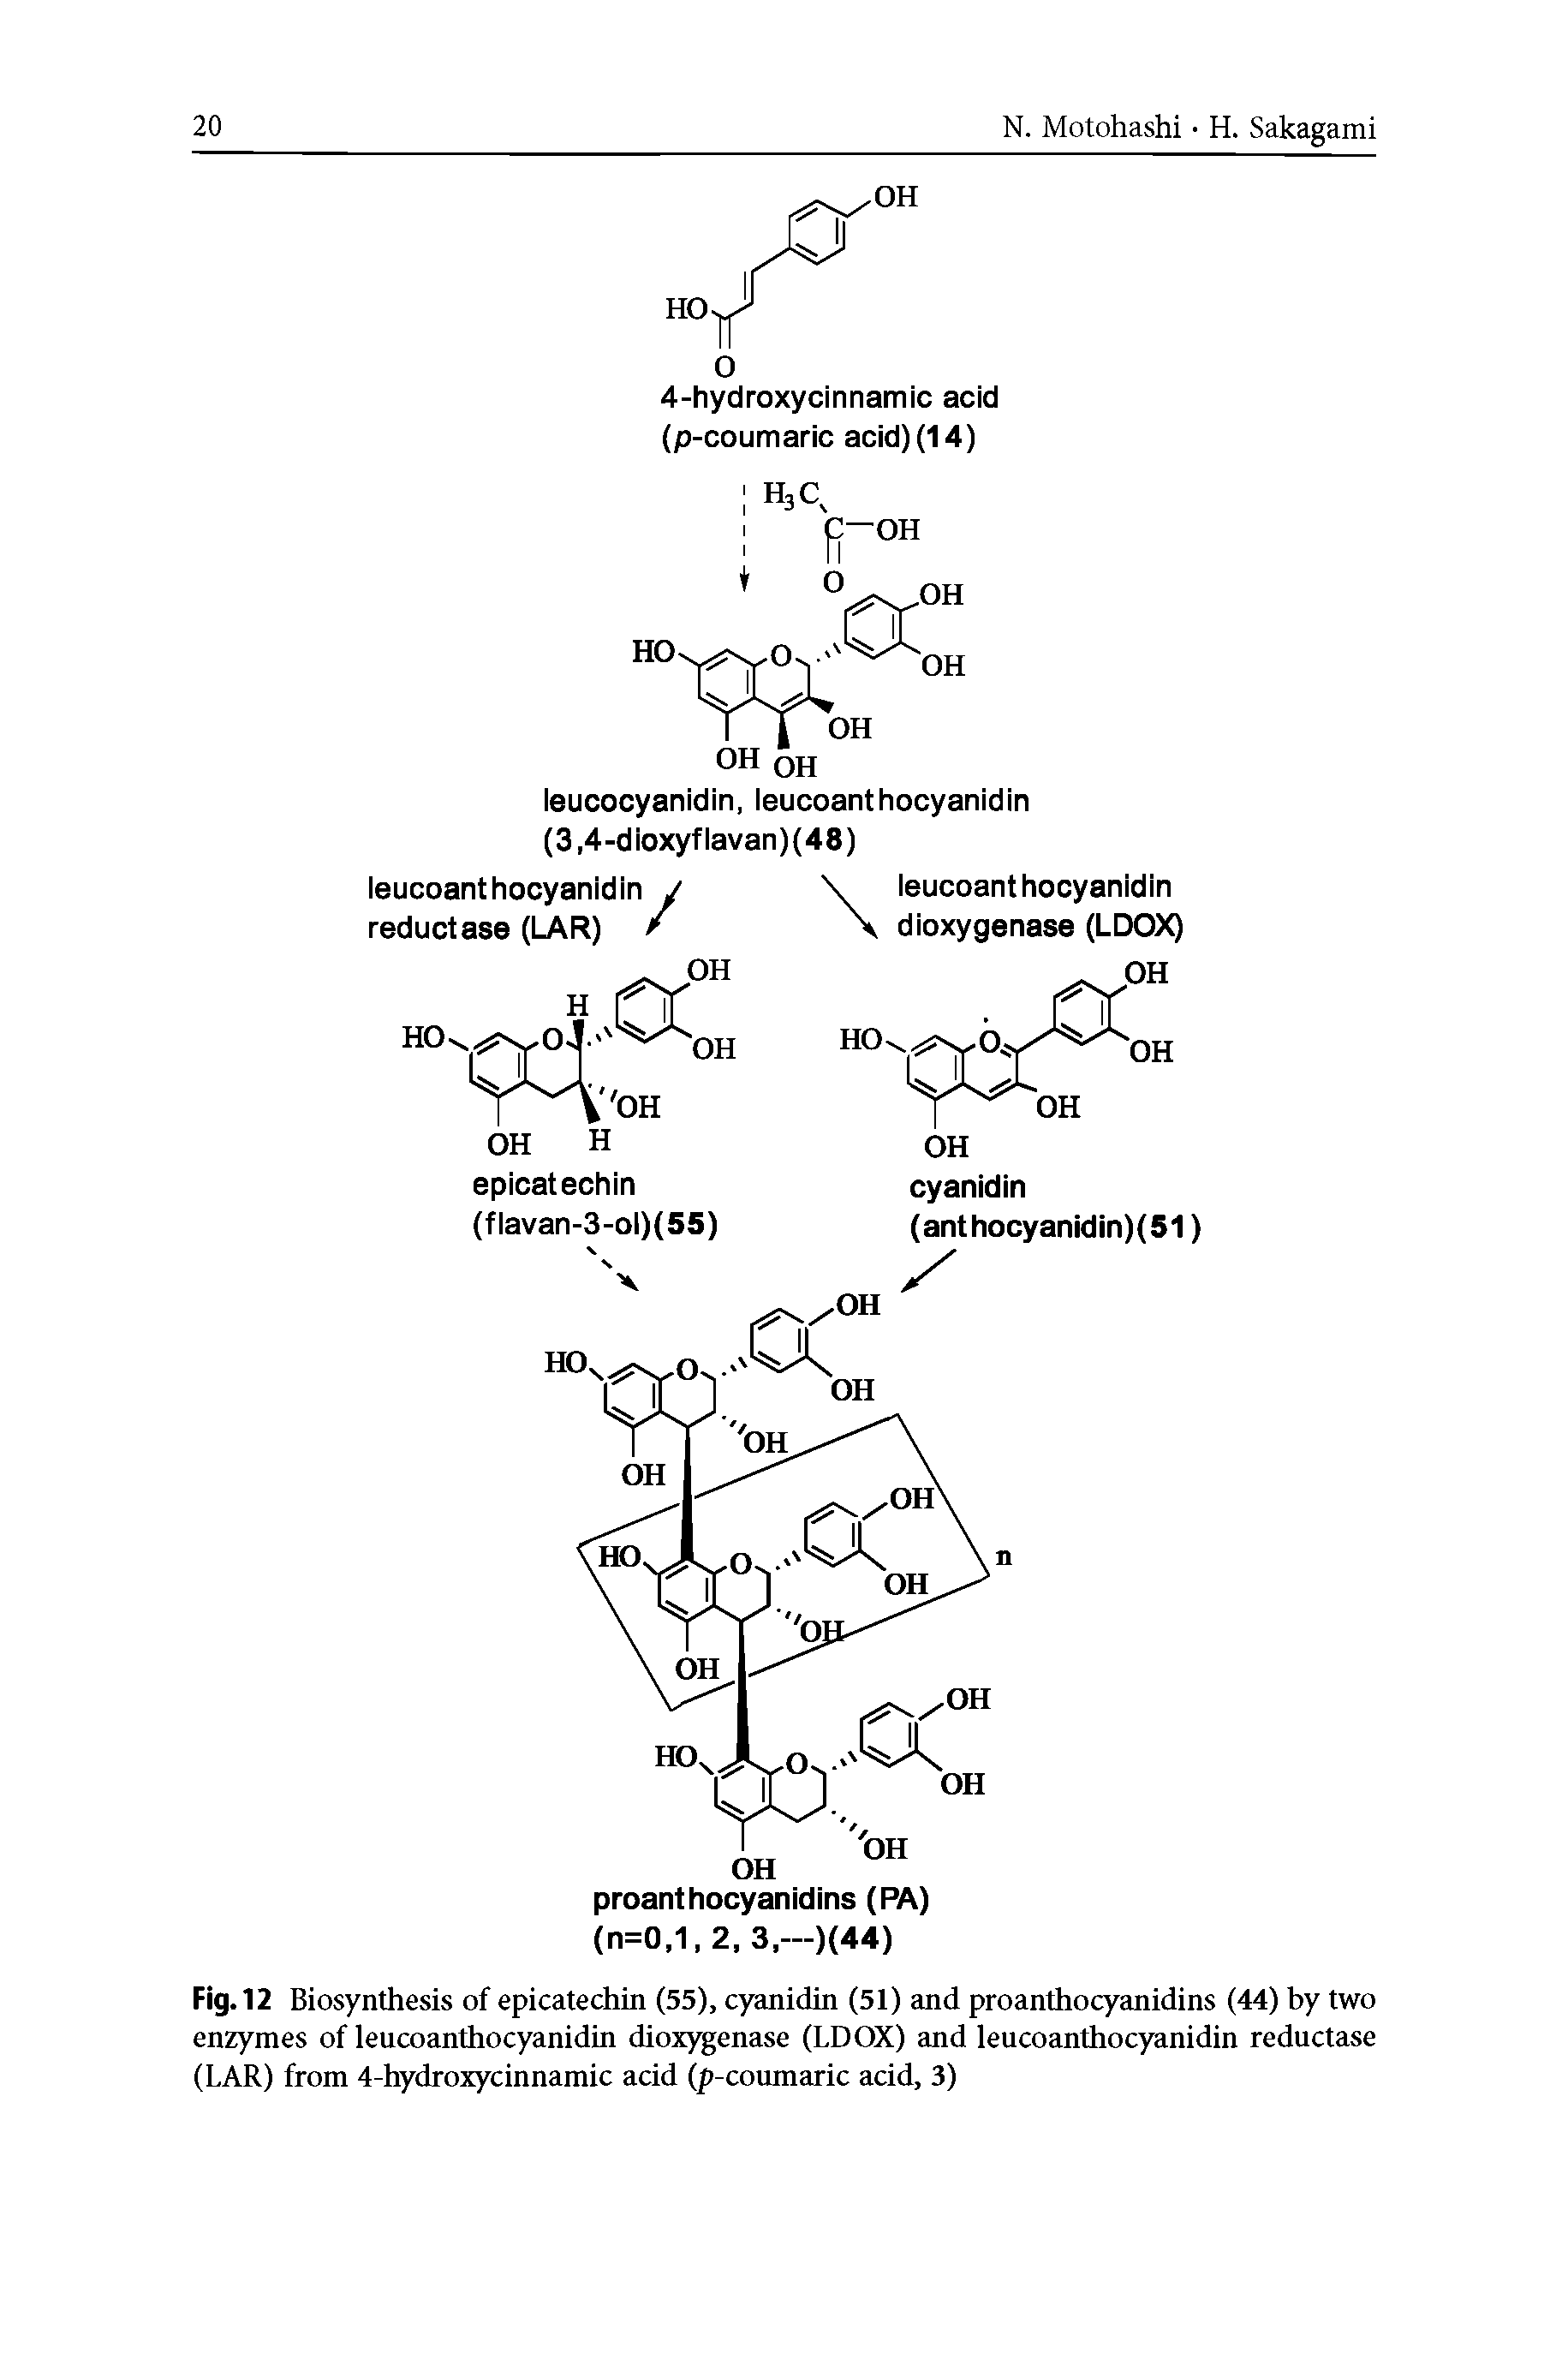 Fig. 12 Biosynthesis of epicatechin (55), cyanidin (51) and proanthocyanidins (44) by two enzymes of leucoanthocyanidin dioxygenase (LDOX) and leucoanthocyanidin reductase (LAR) from 4-hydroxycinnamic acid (p-coumaric acid, 3)...